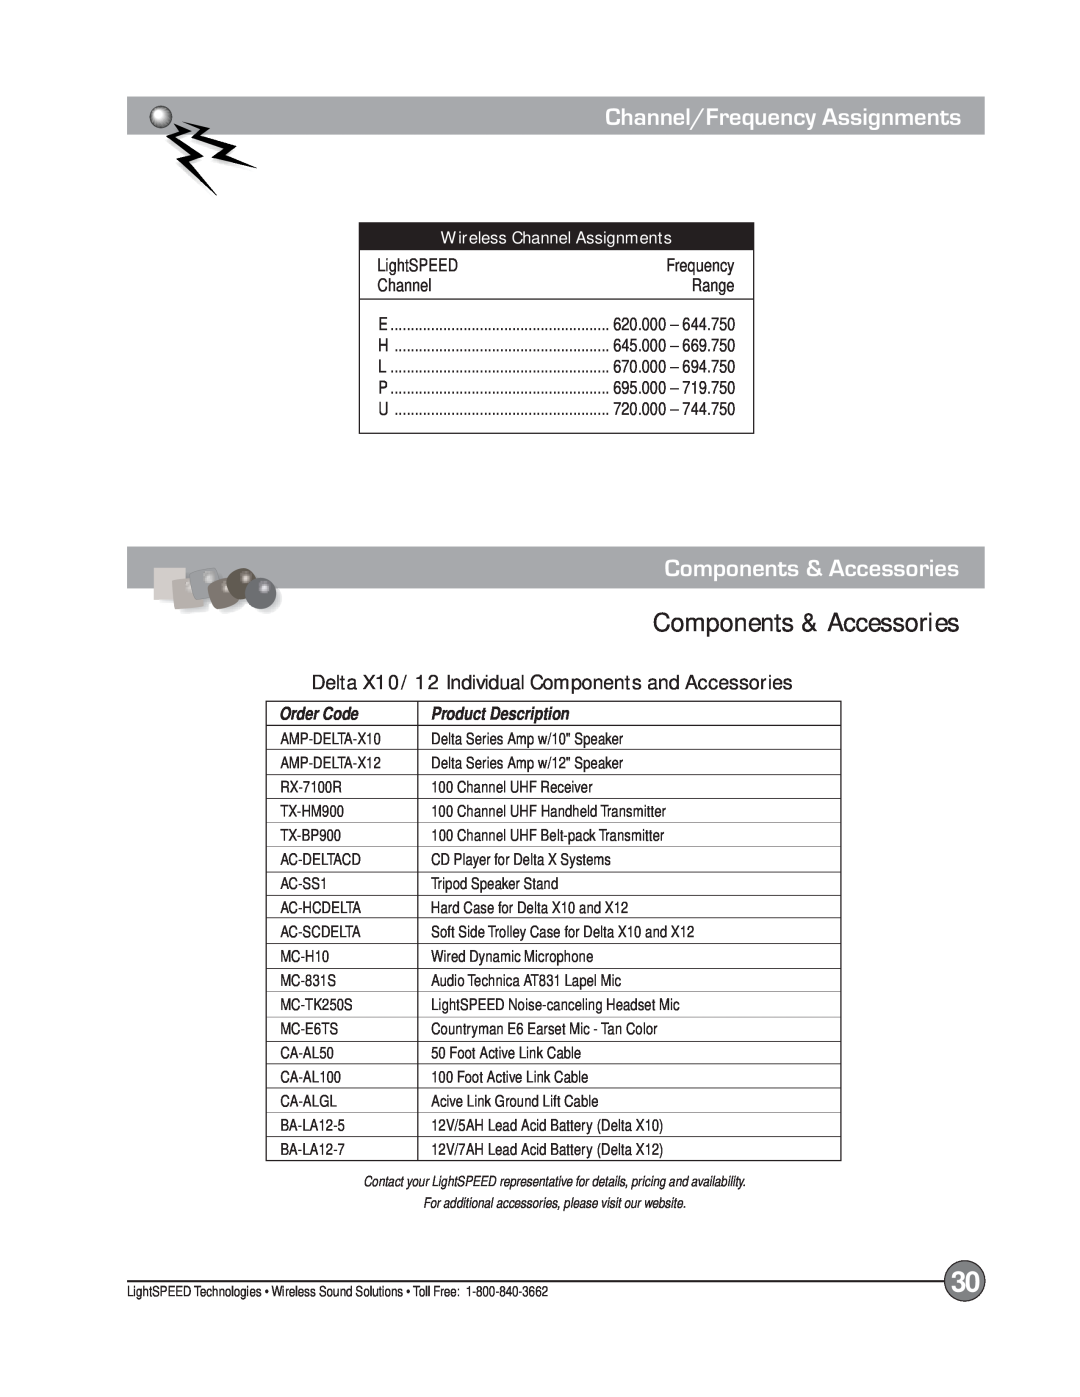 LightSpeed Technologies X12 manual Components & Accessories, Channel/Frequency Assignments, Wireless Channel Assignments 